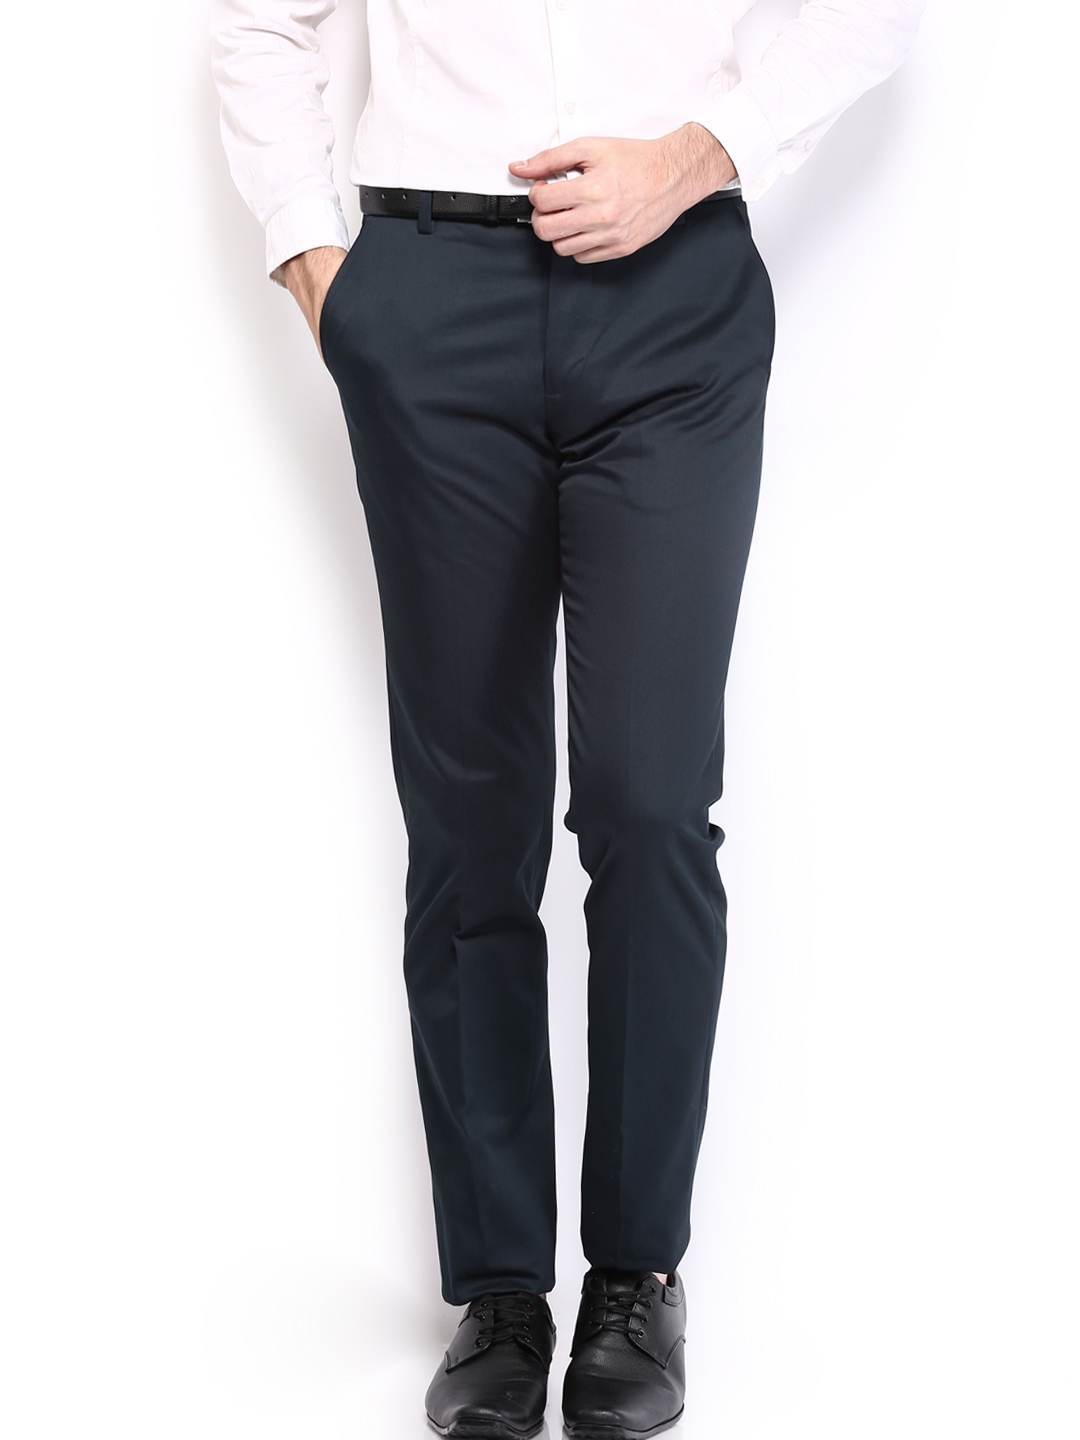 US Polo Assn Men Solid Formal Wear Trousers  KNOCKOUT  Grey  66064